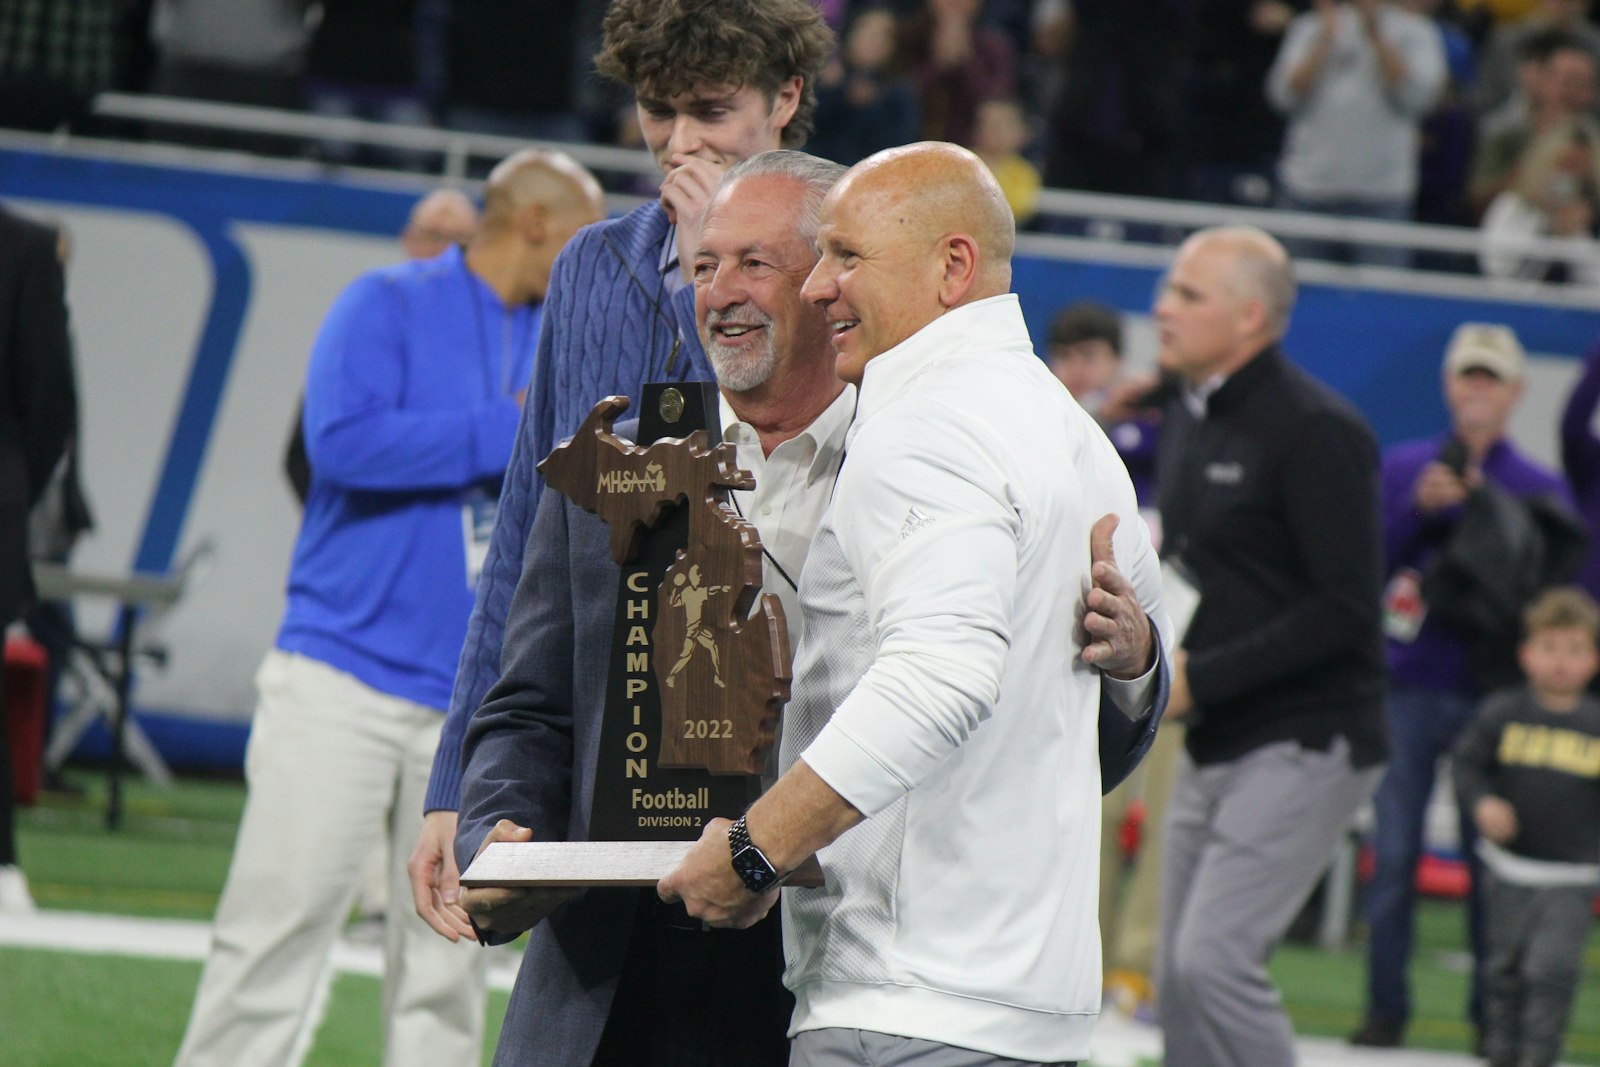 Winning coach Dan Rohn accepts the state championship trophy from Catholic High School League director Vic Michaels.